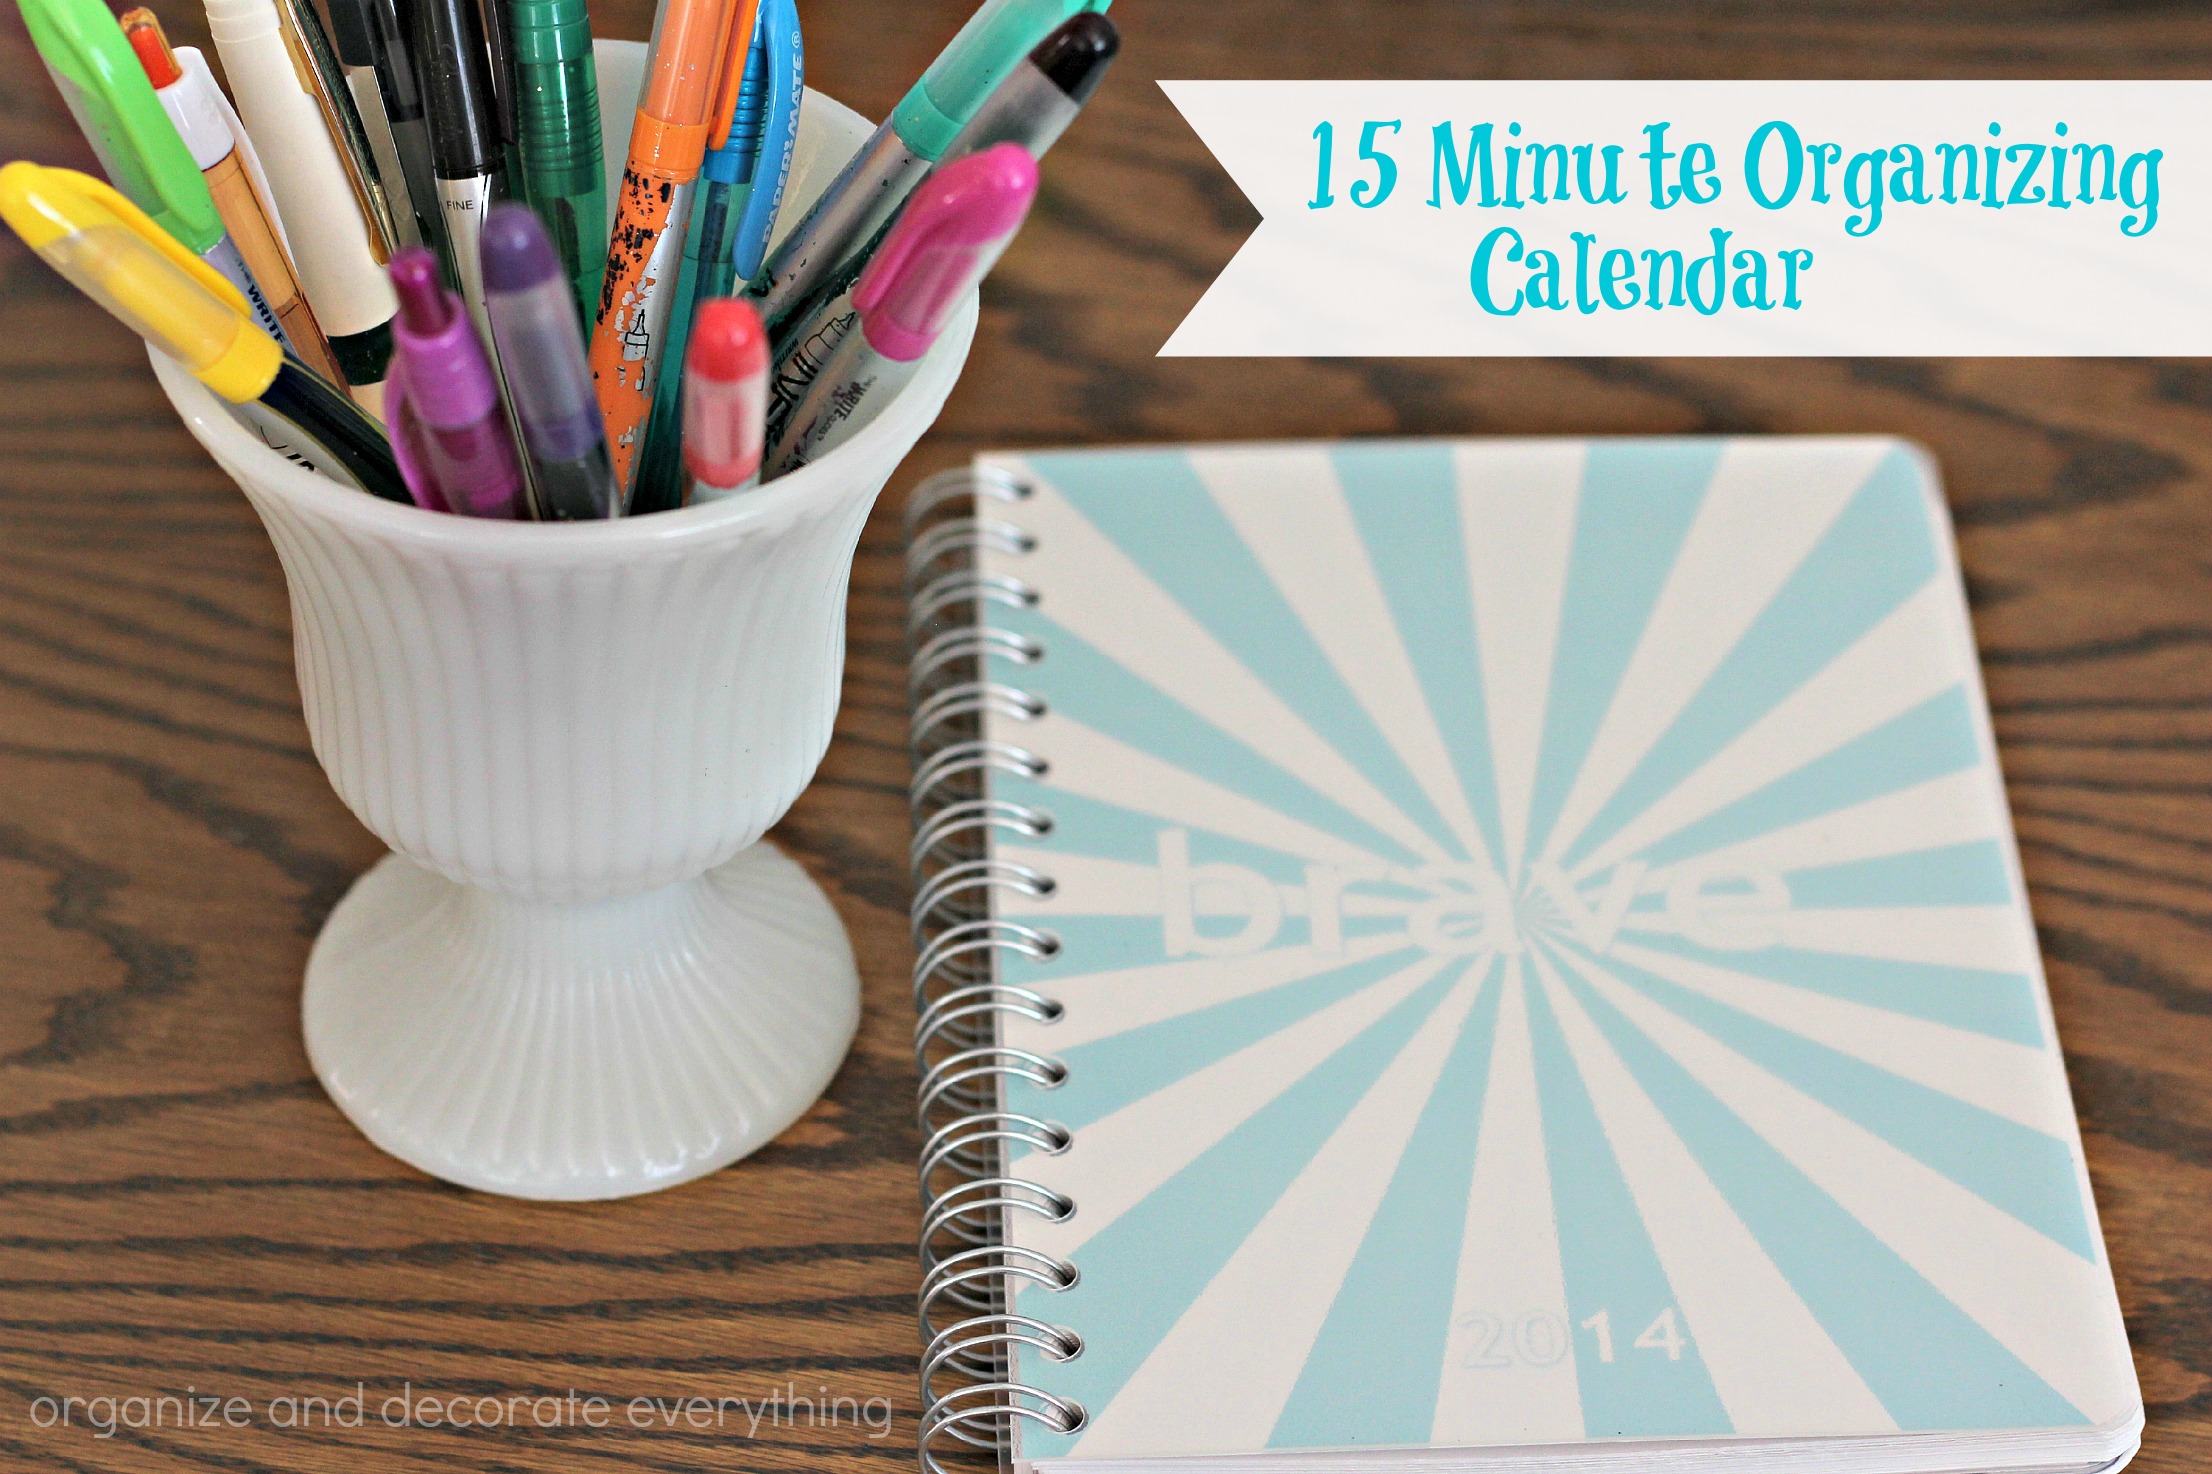 31 Days of 15 Minute Organizing Day 13: Calendar Organize and